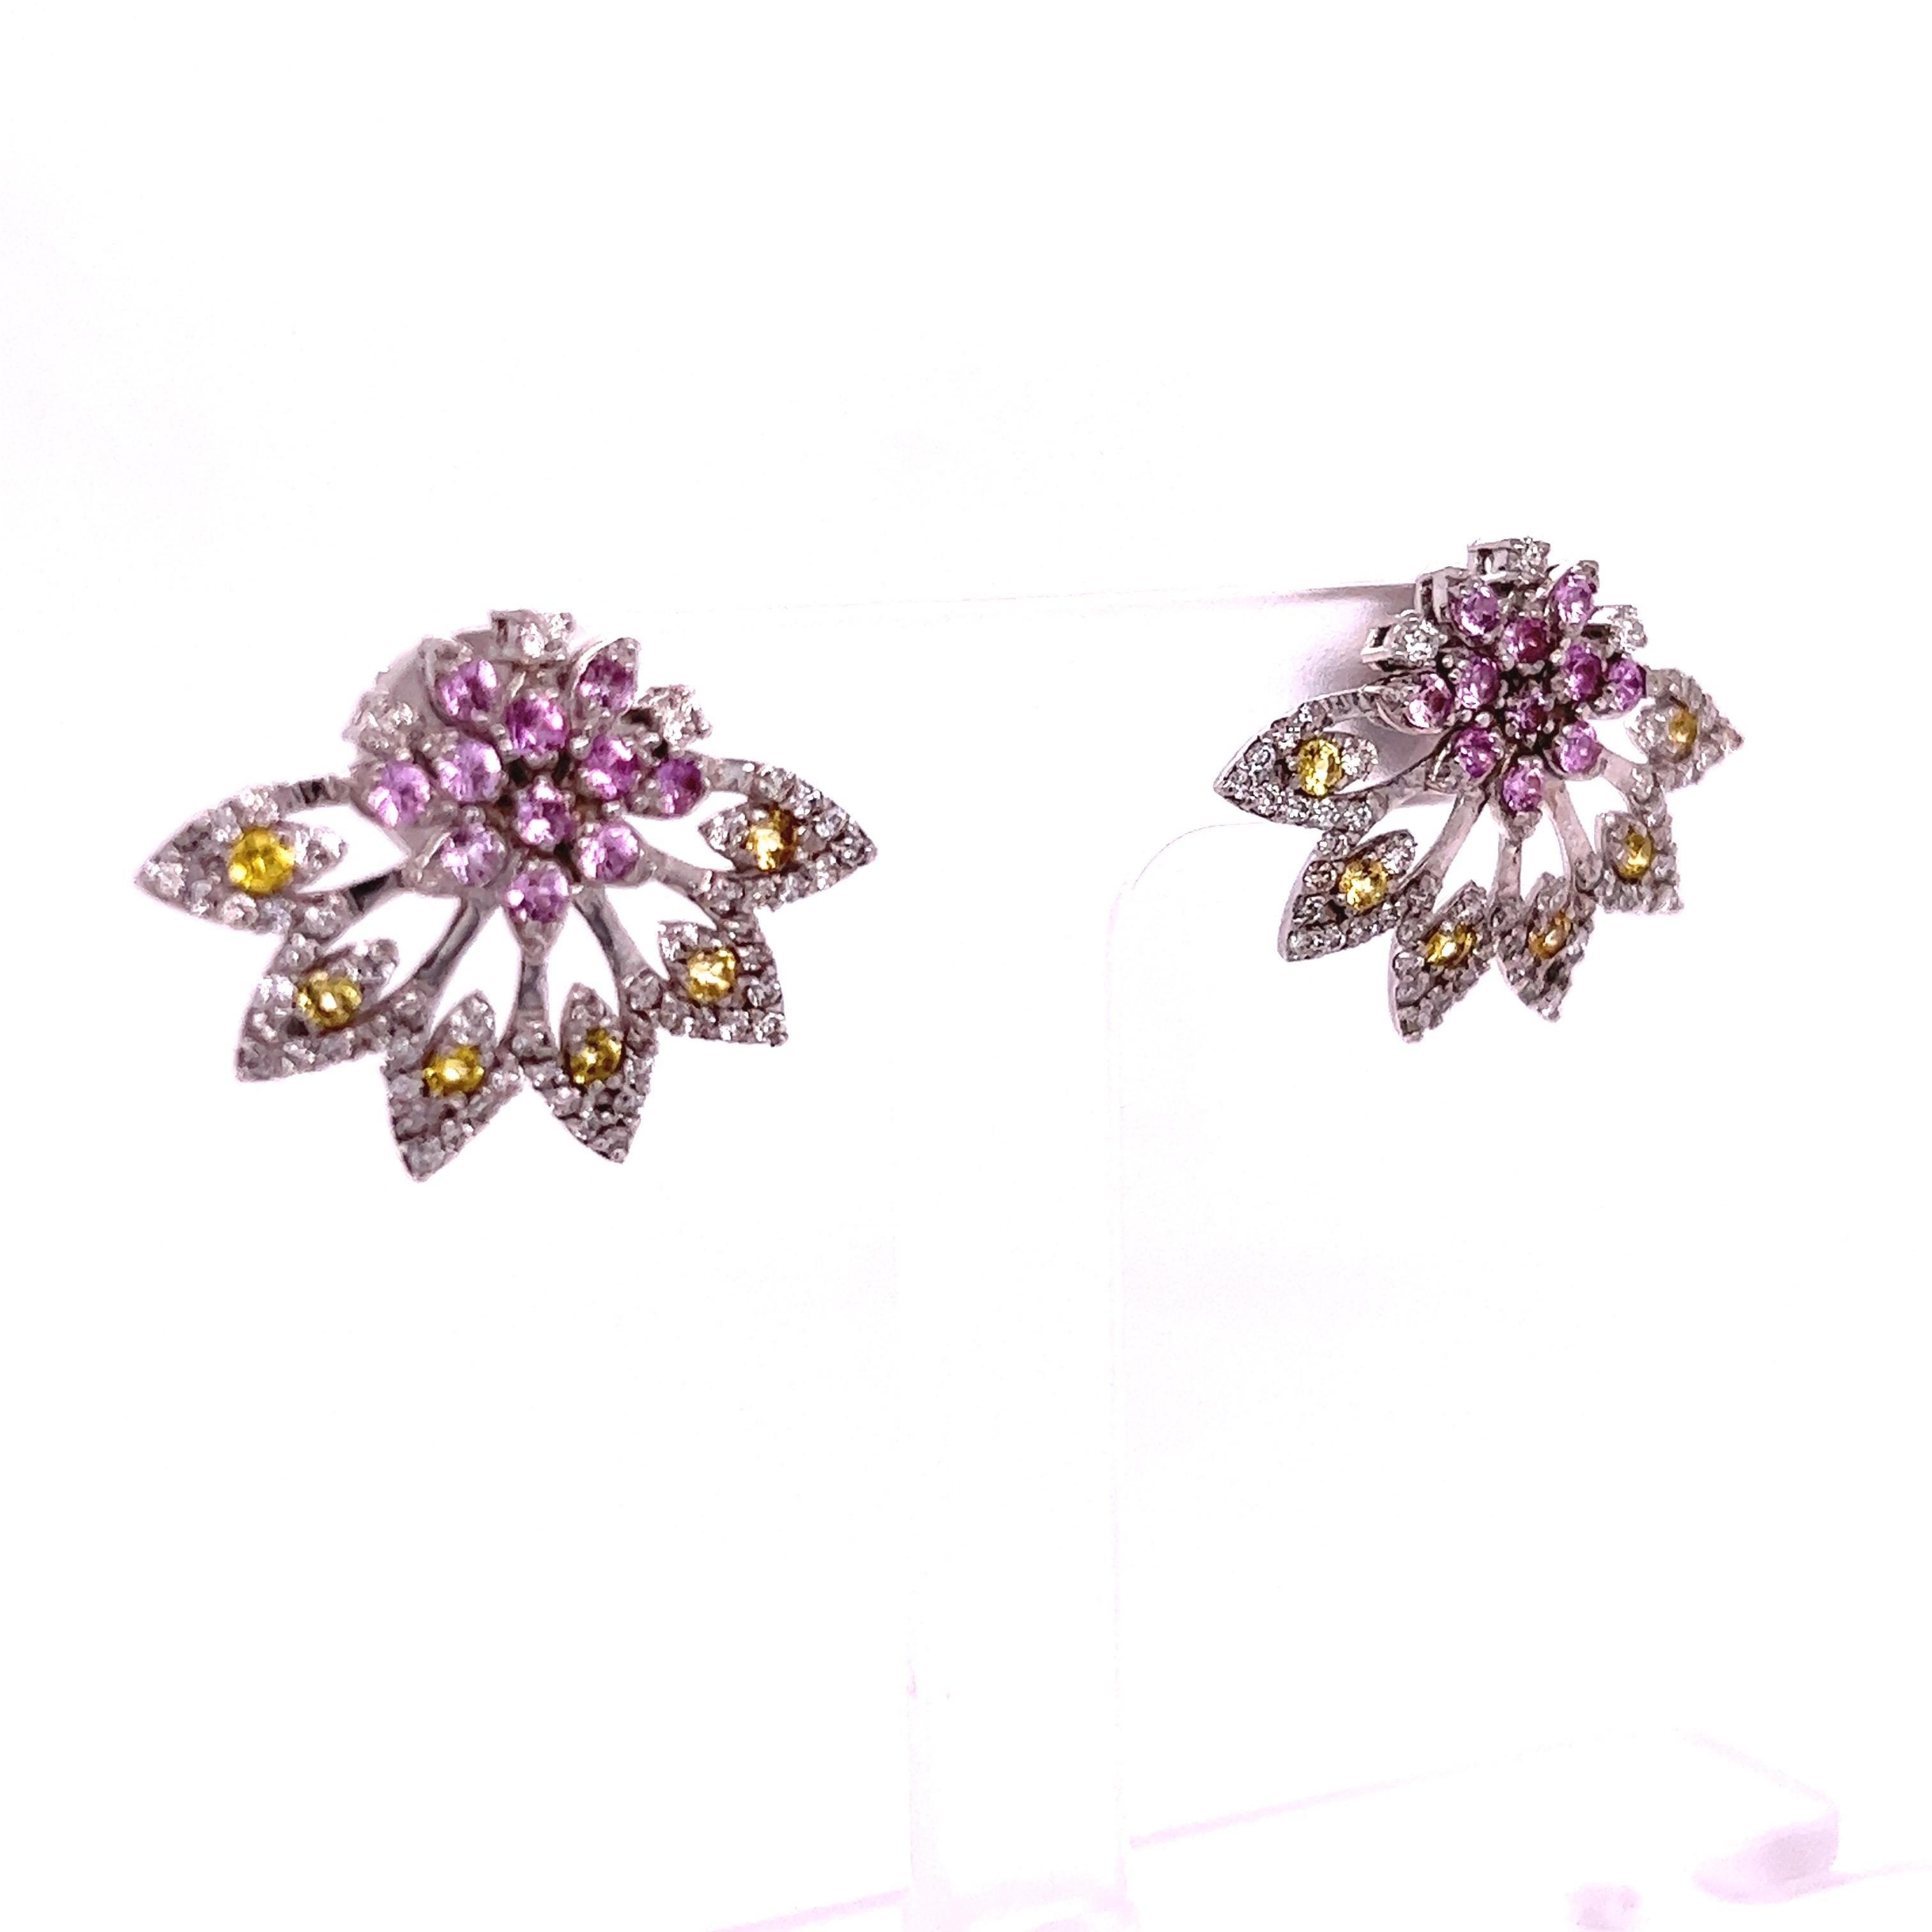 These earrings have Natural Pink Sapphires that weigh 0.66 carats and Natural Yellow Sapphires that weigh 0.37 carats. It also has Natural Round Cut Diamonds that weigh 0.78 carats. The total carat weight of the earrings are 1.81 carats. 

The